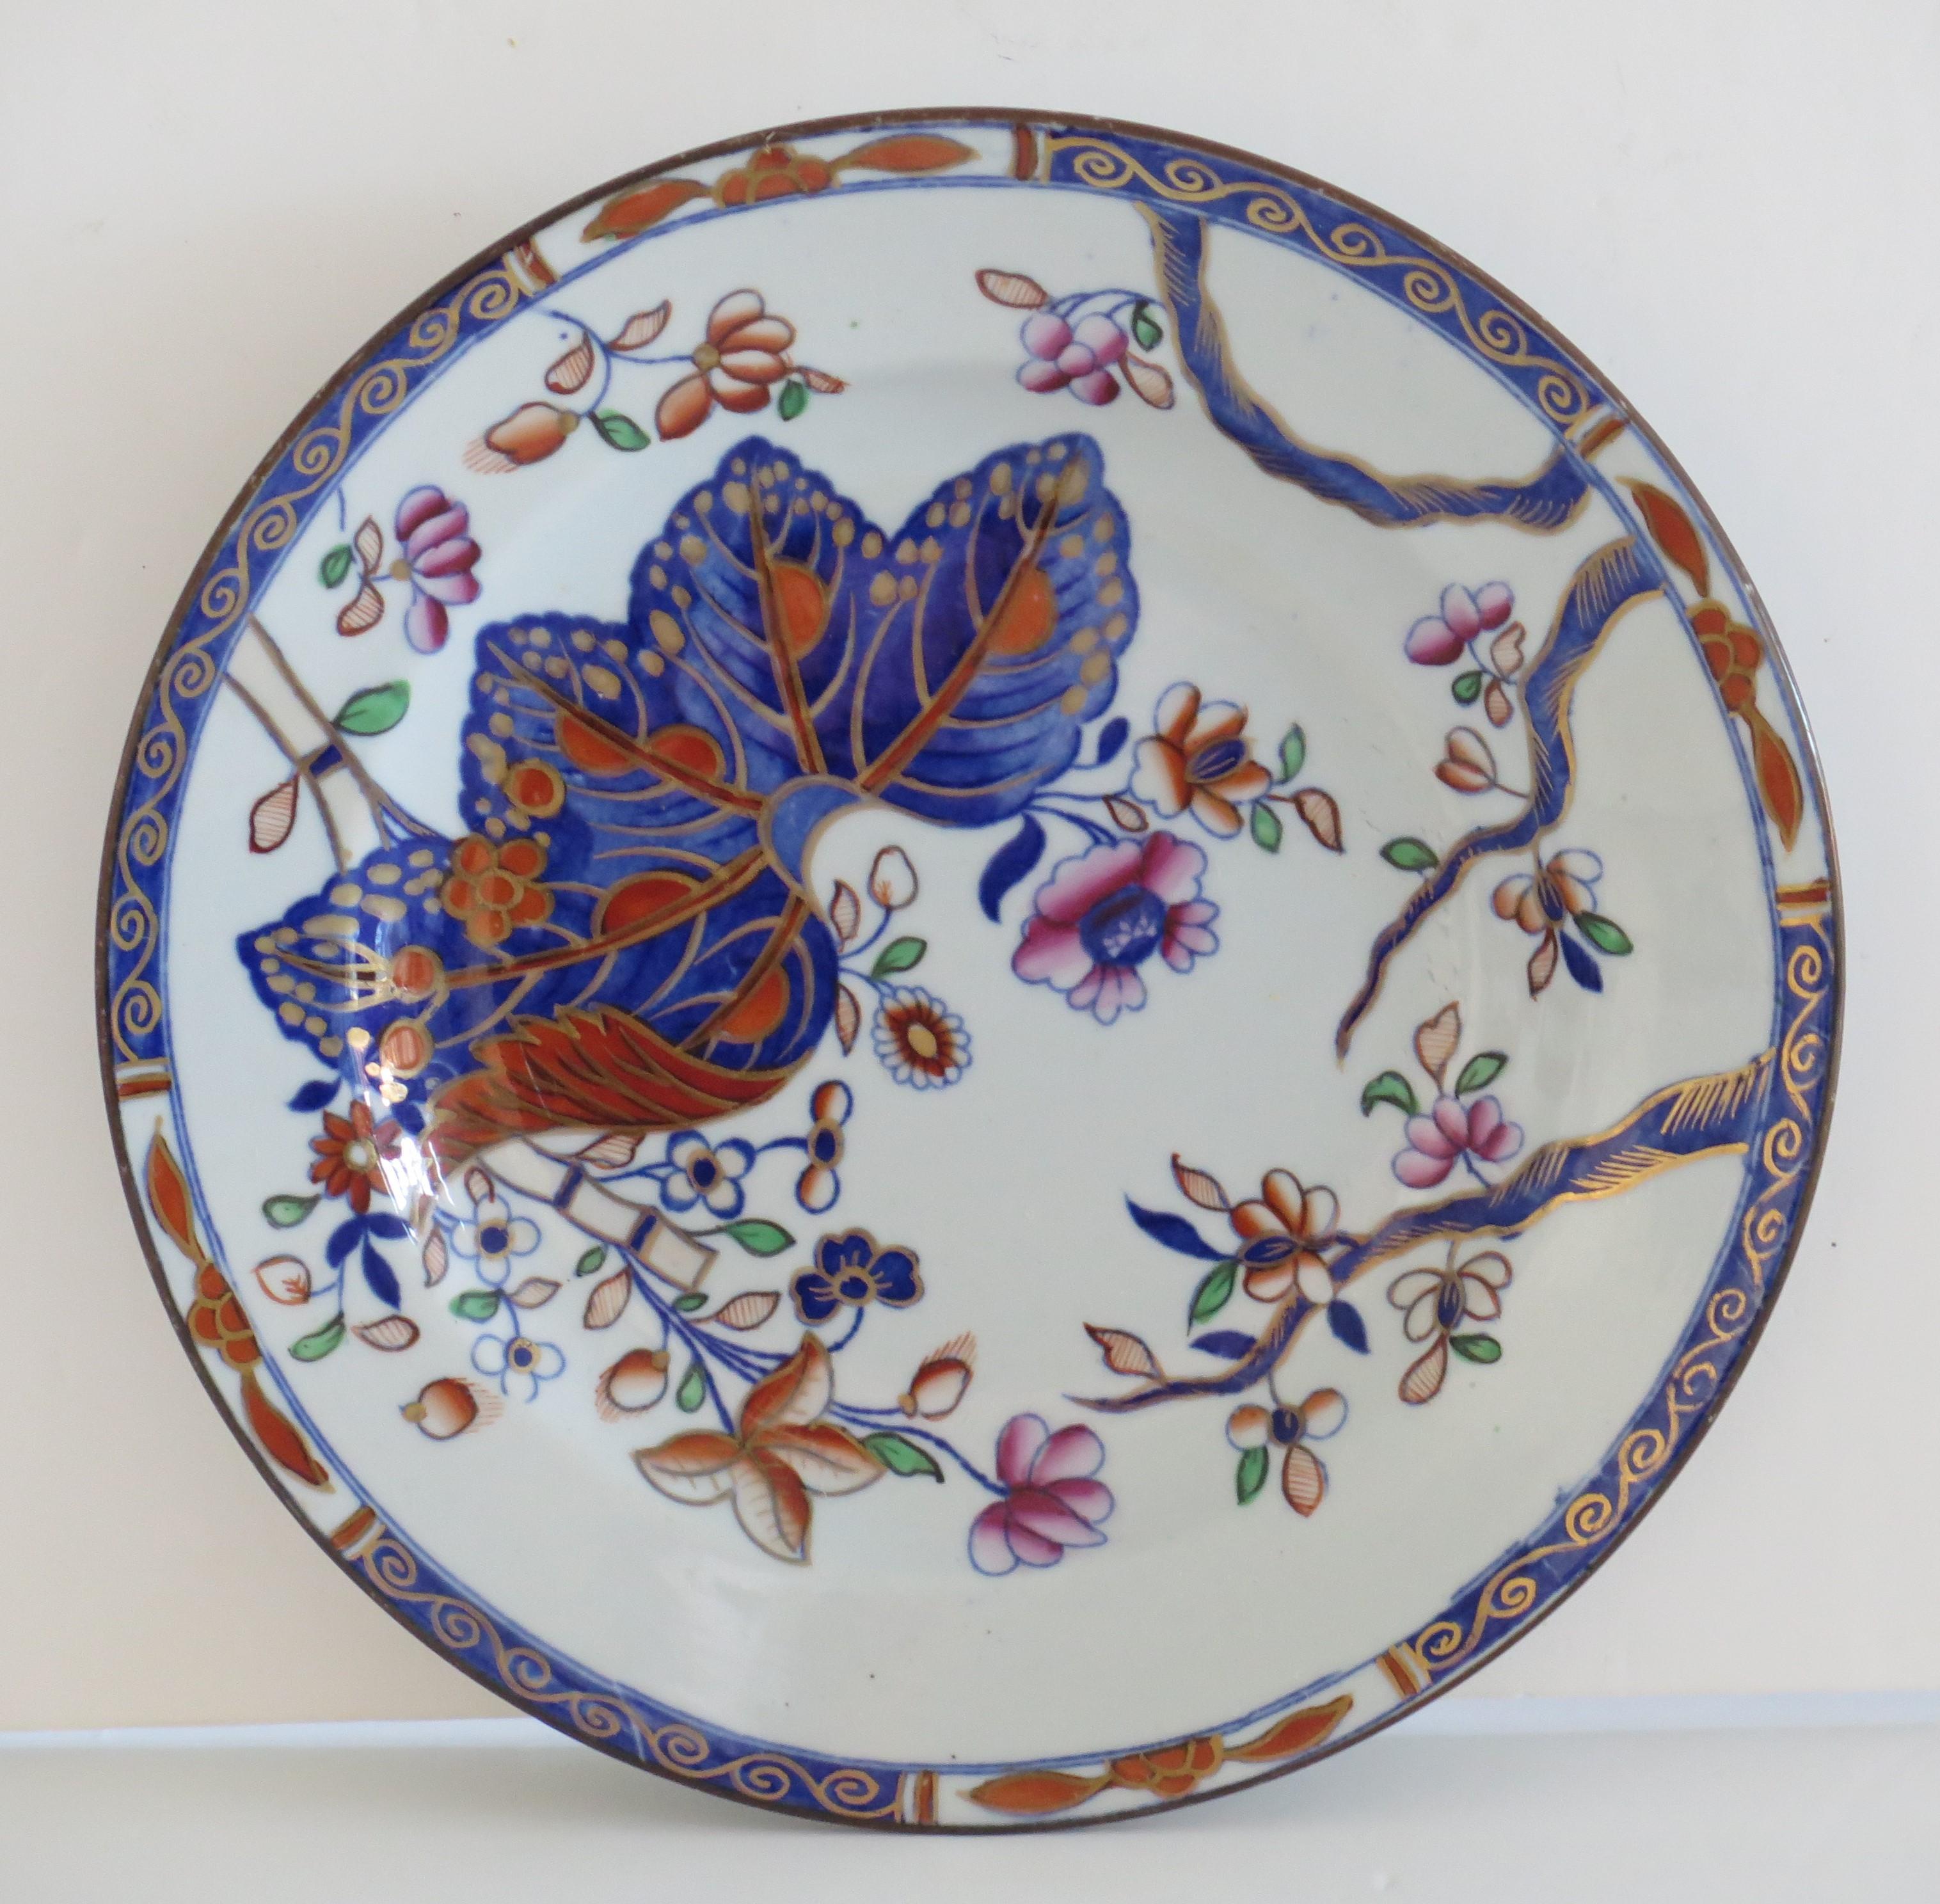 English Georgian Spode Stone China Side Plate or Dish in Tobacco Leaf Pattern No. 2061